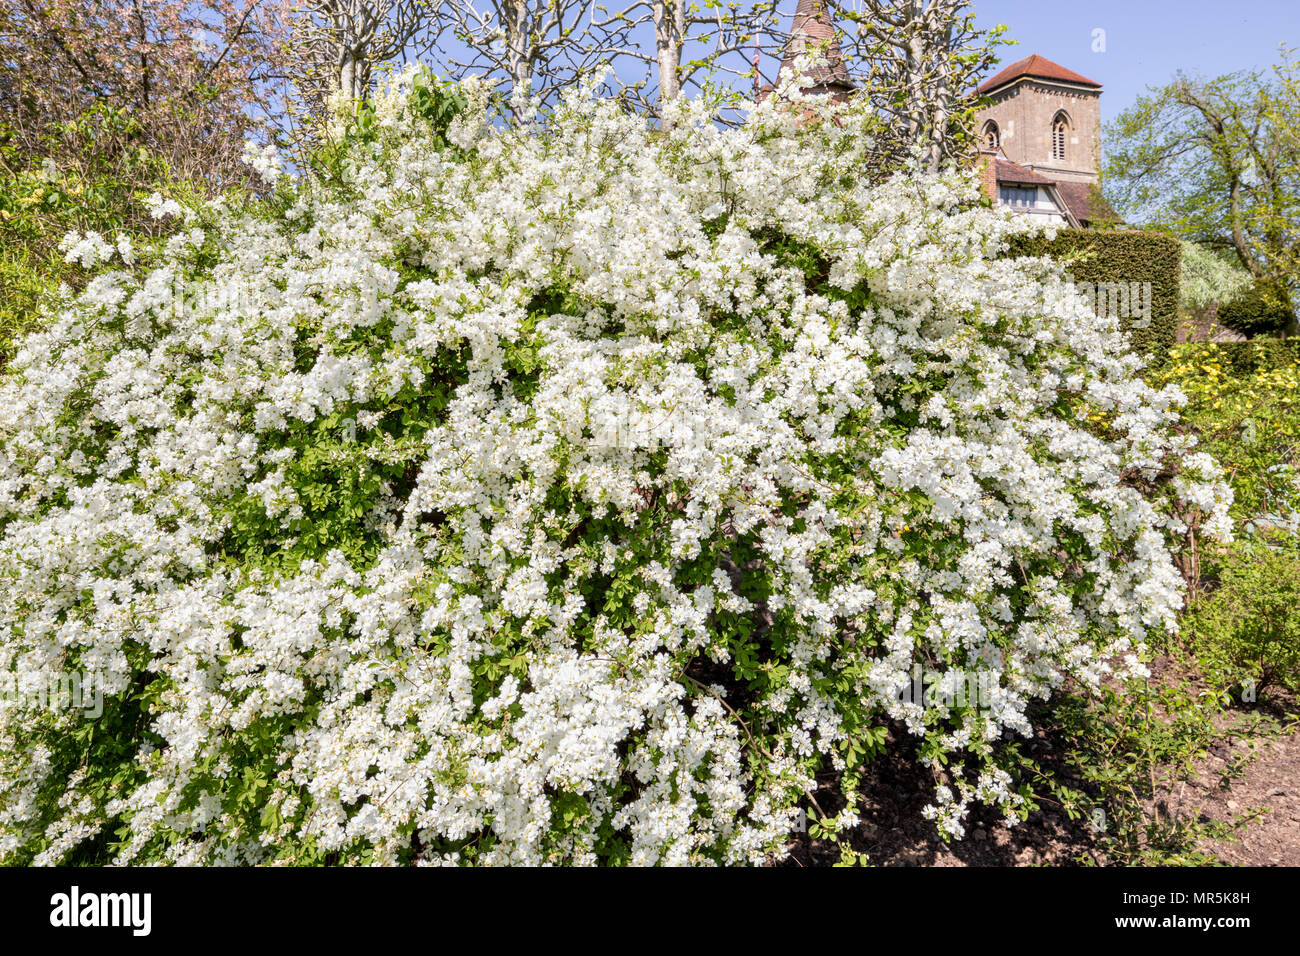 Pearl bush Exochorda macrantha ‘The Bride’.in the gardens of Little Malvern Court a 15th century Priors Hall at Little Malvern, Worcestershire UK Stock Photo